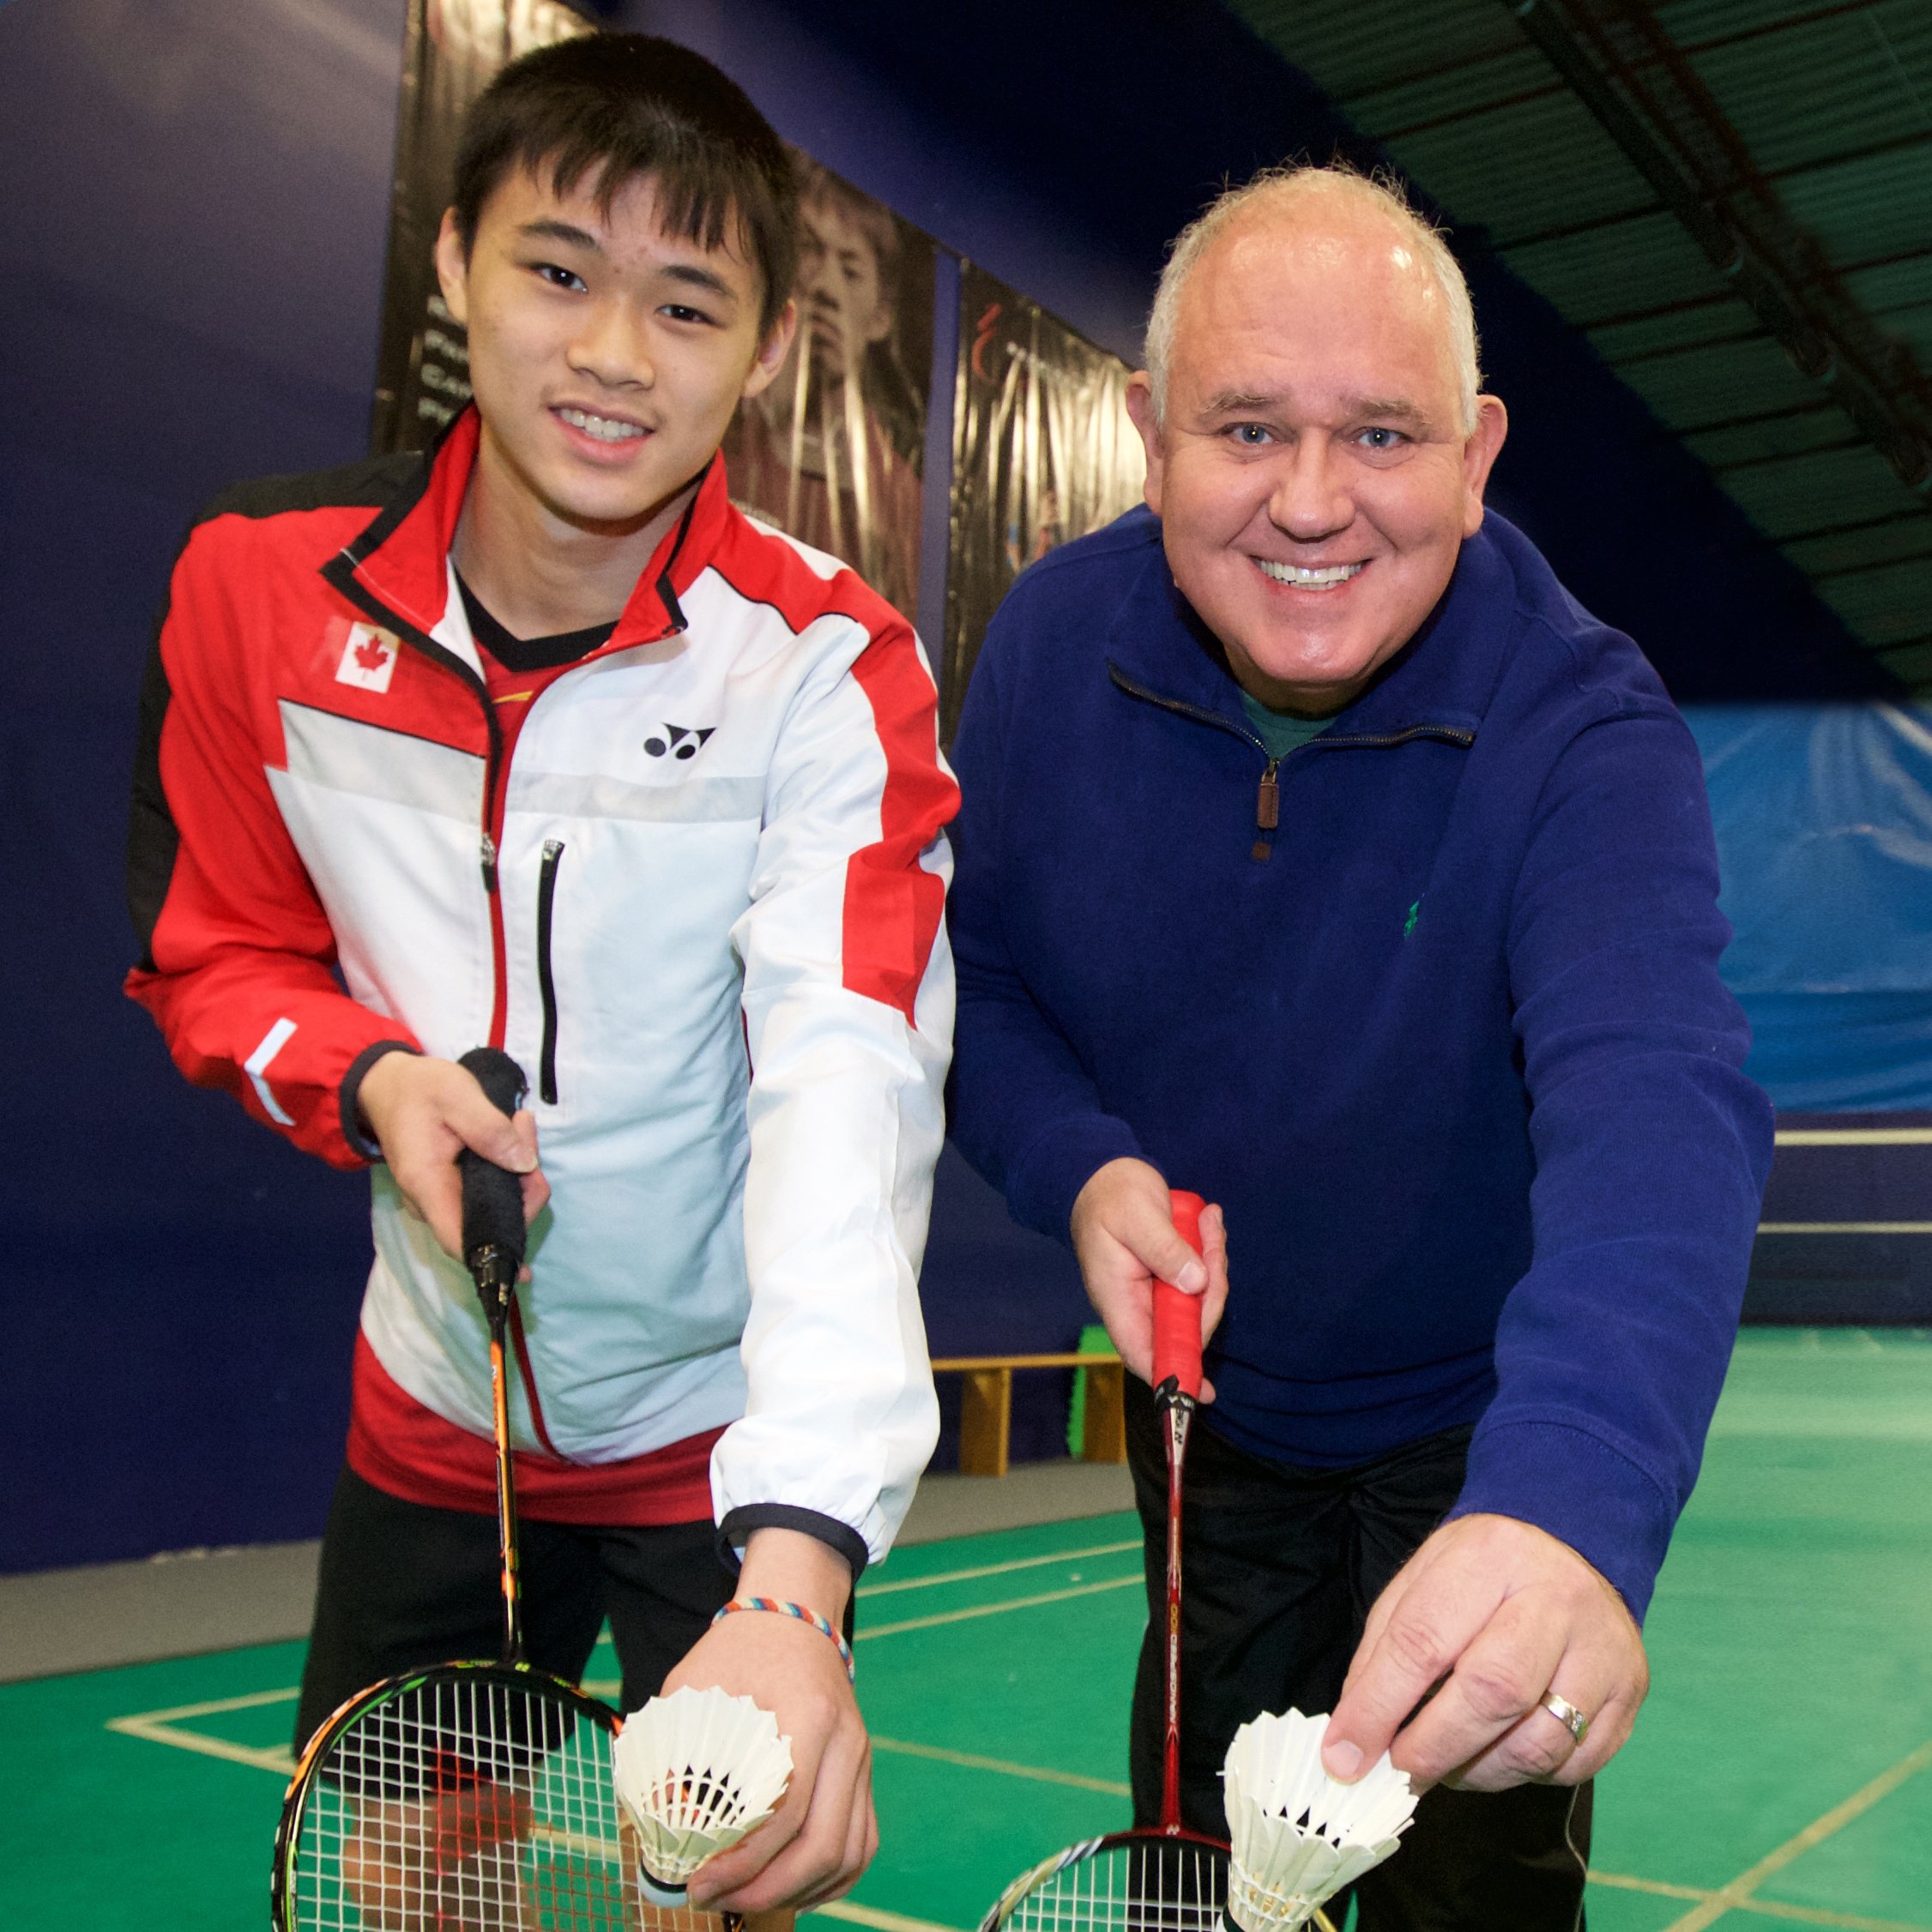 City of Markham on Twitter: "WATCH: @CTVToronto's feature on 18-year-old  Brian Yang, Canada's first Olympic badminton medalist who will lead  @TeamCanada @canadabadminton at the 2018 World Junior Badminton  Championships Nov 5 -